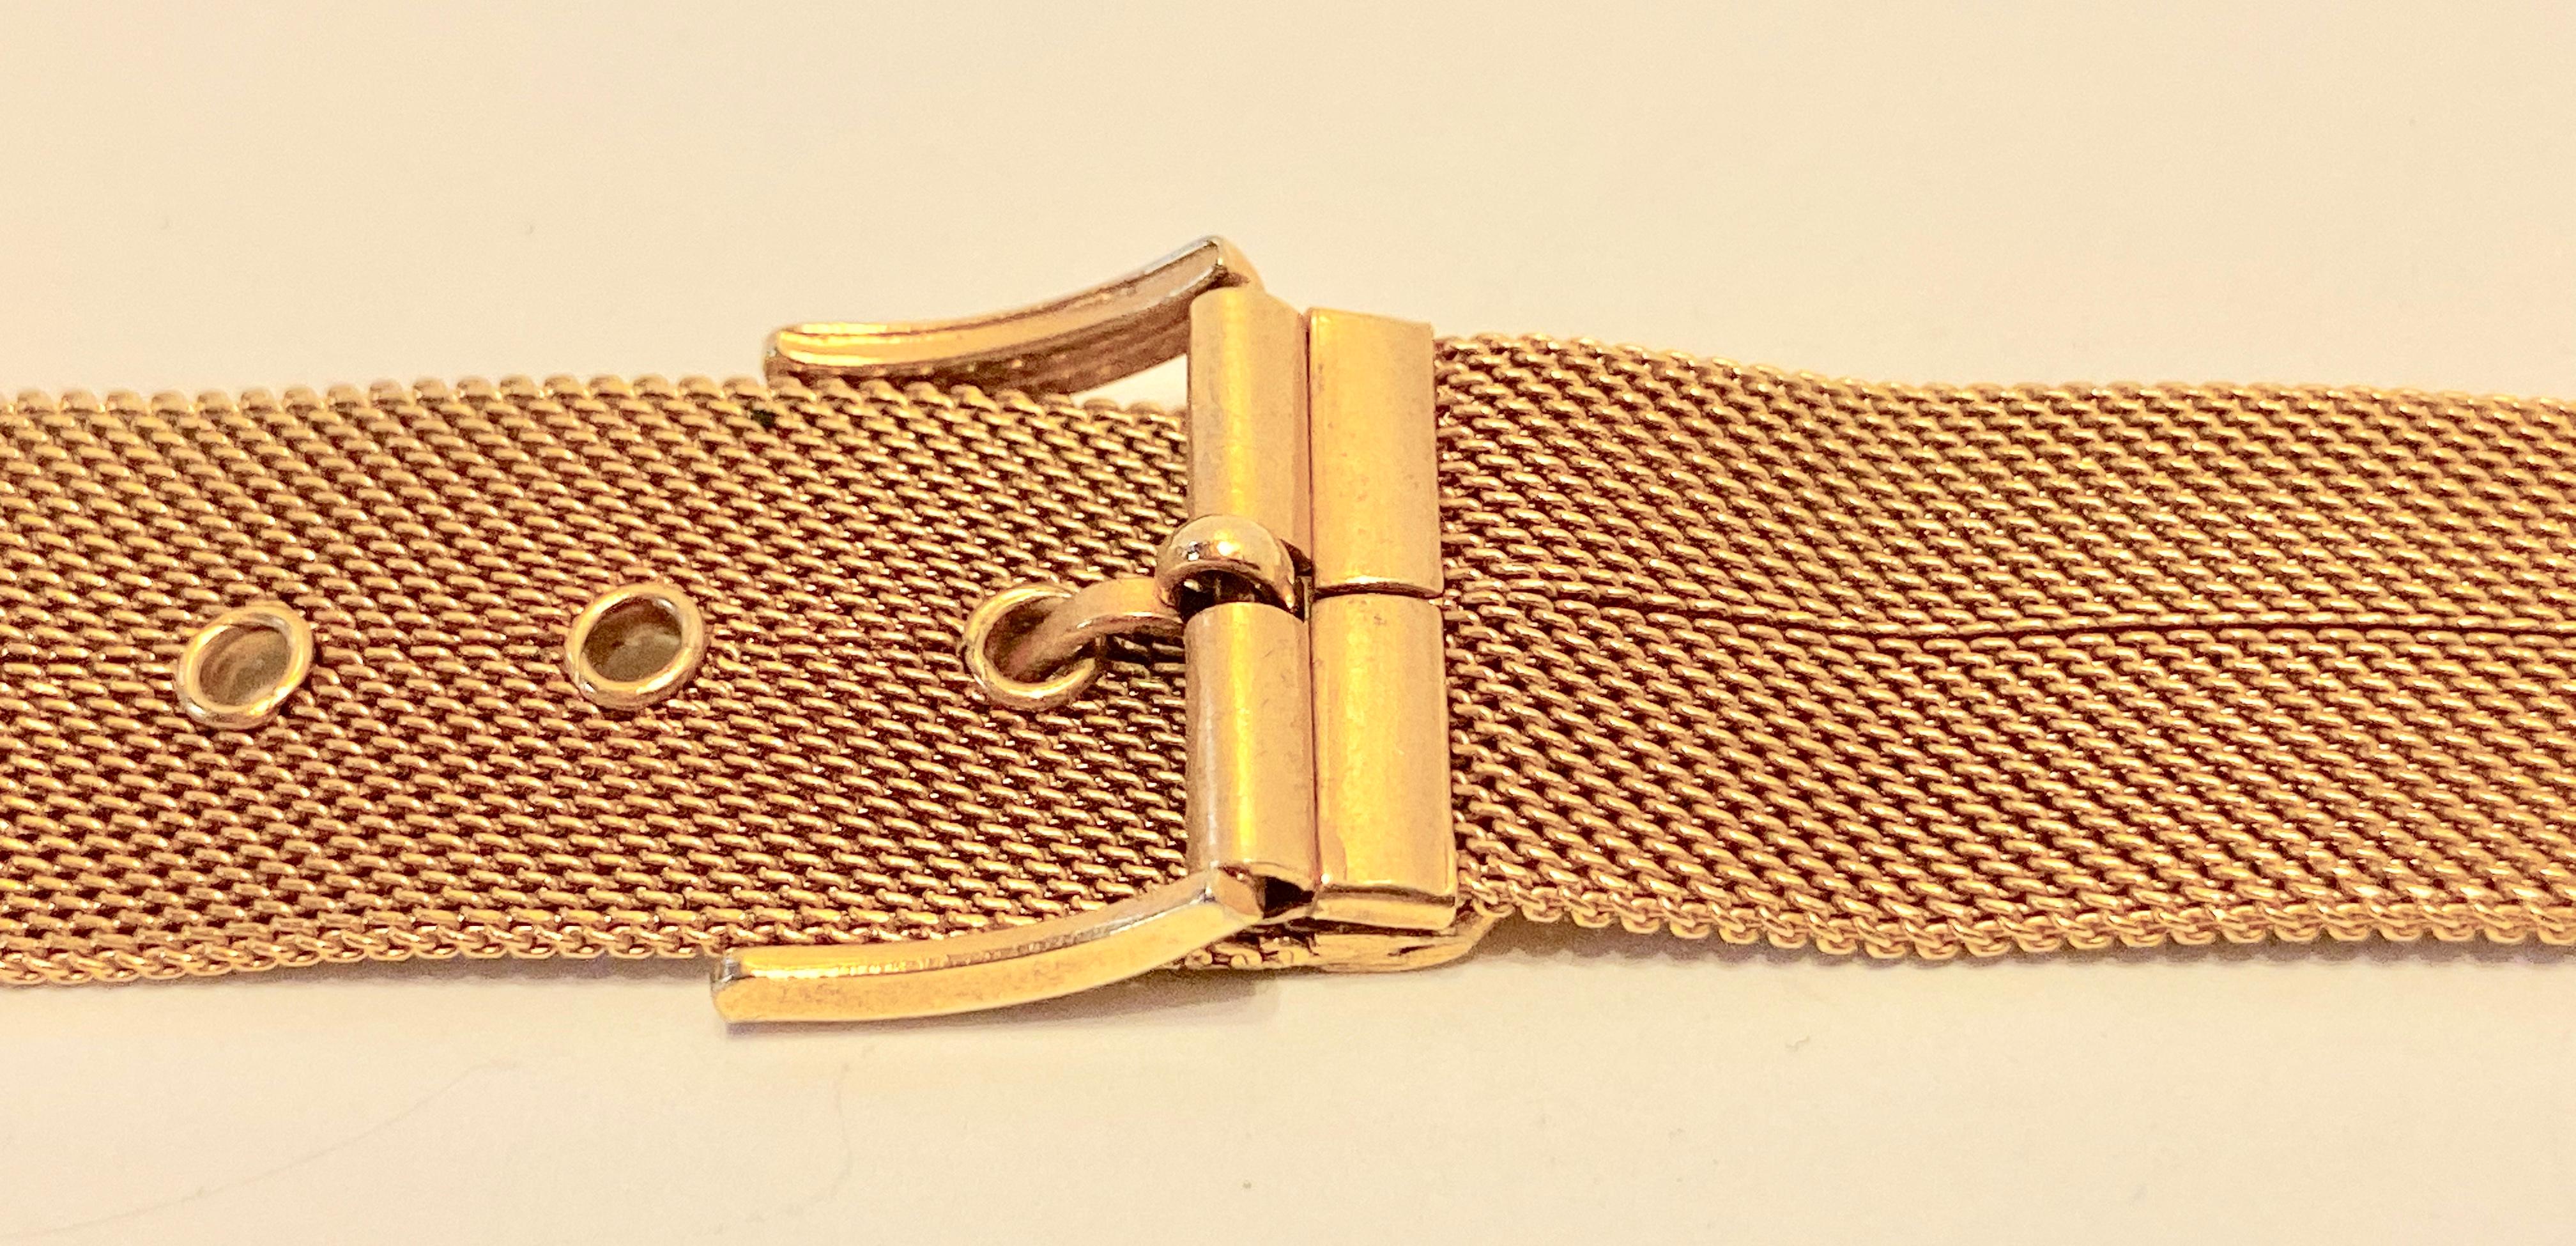 Micro Gold Hardware Mesh 'Buckle' Style Adjustable Watch Strap In Good Condition For Sale In New York, NY